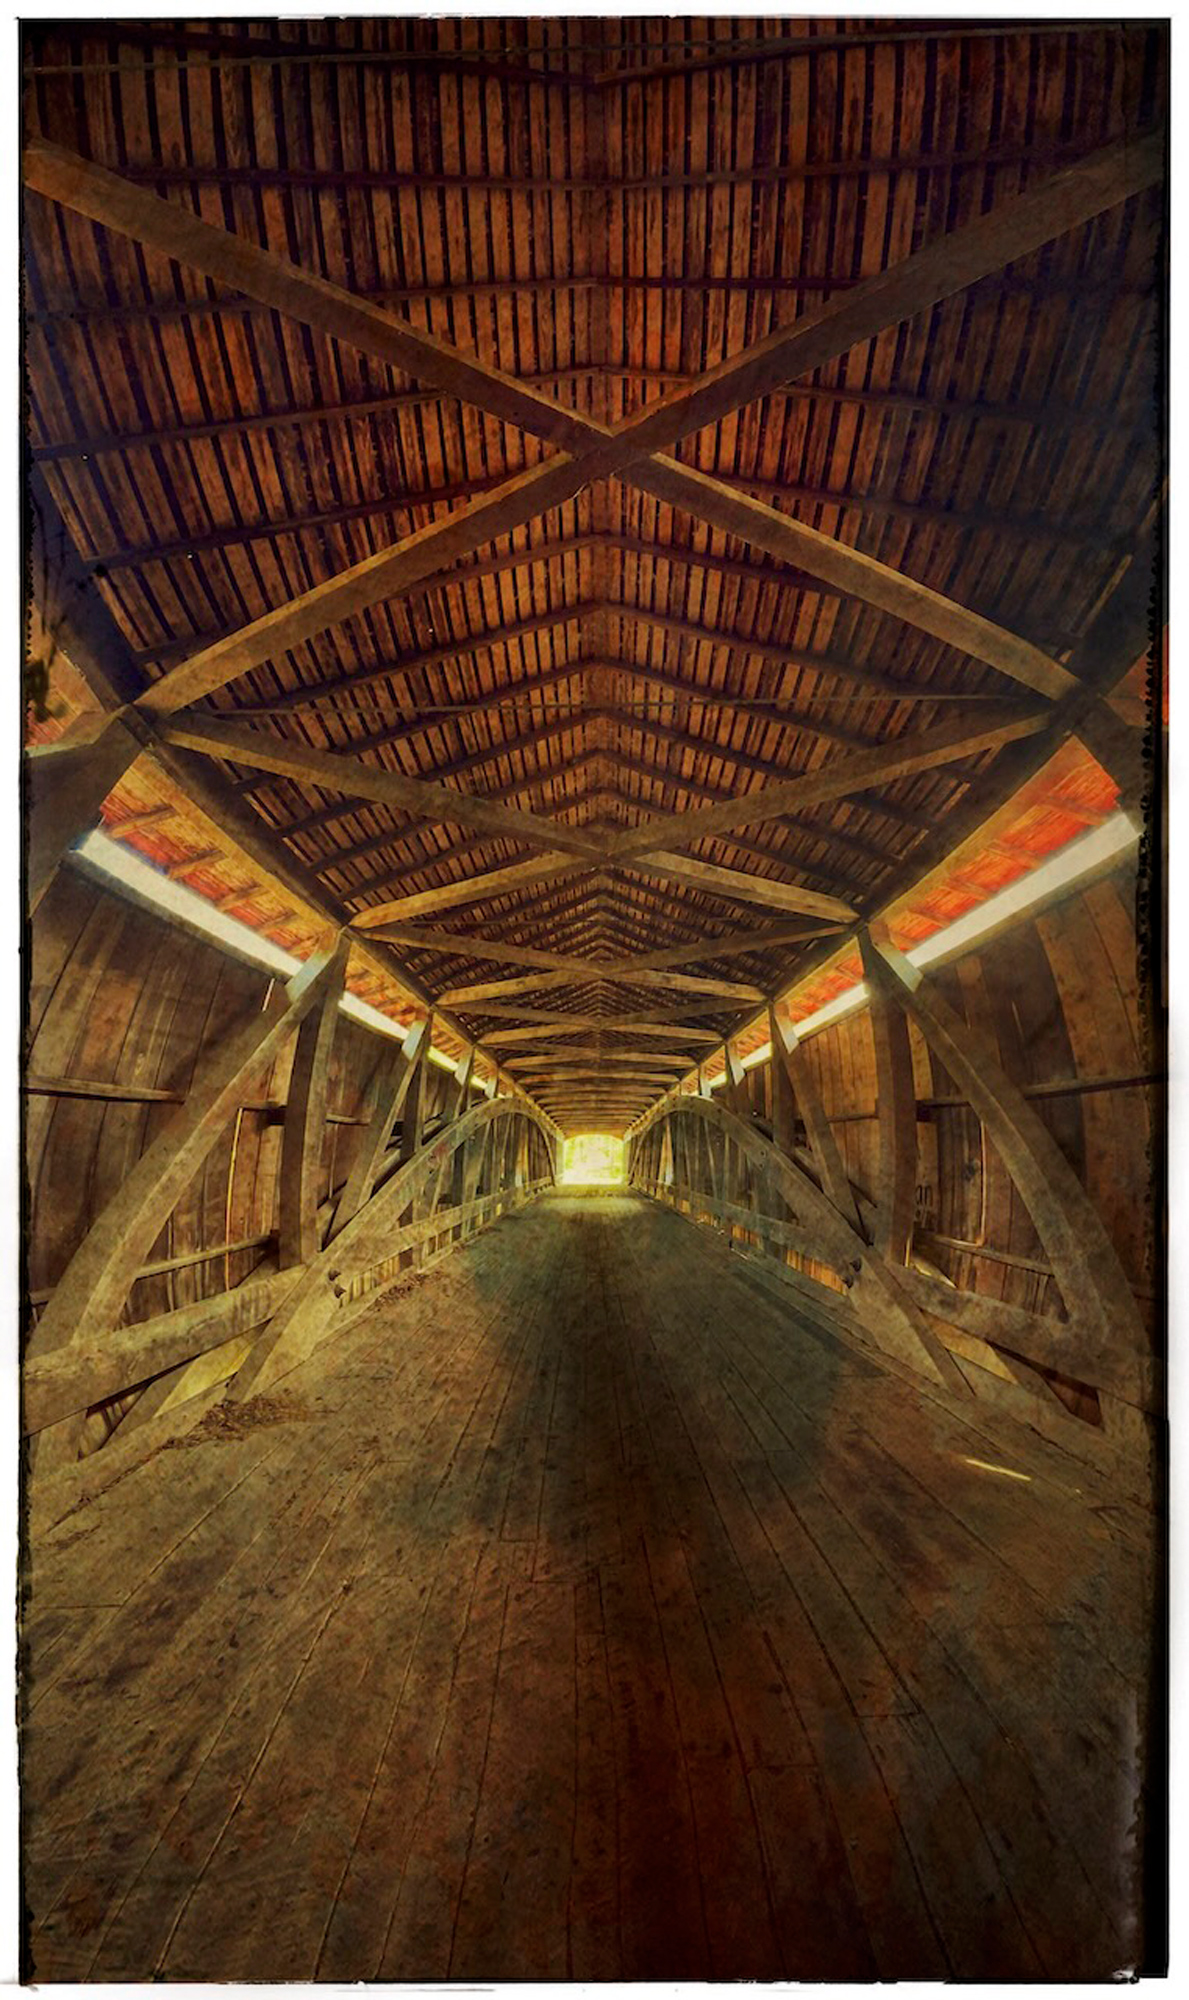 The inside of above bridge done with an iPhone using vertical pano. It took a couple of tries to get it right. Then finished off in Snapped and Distressed+.